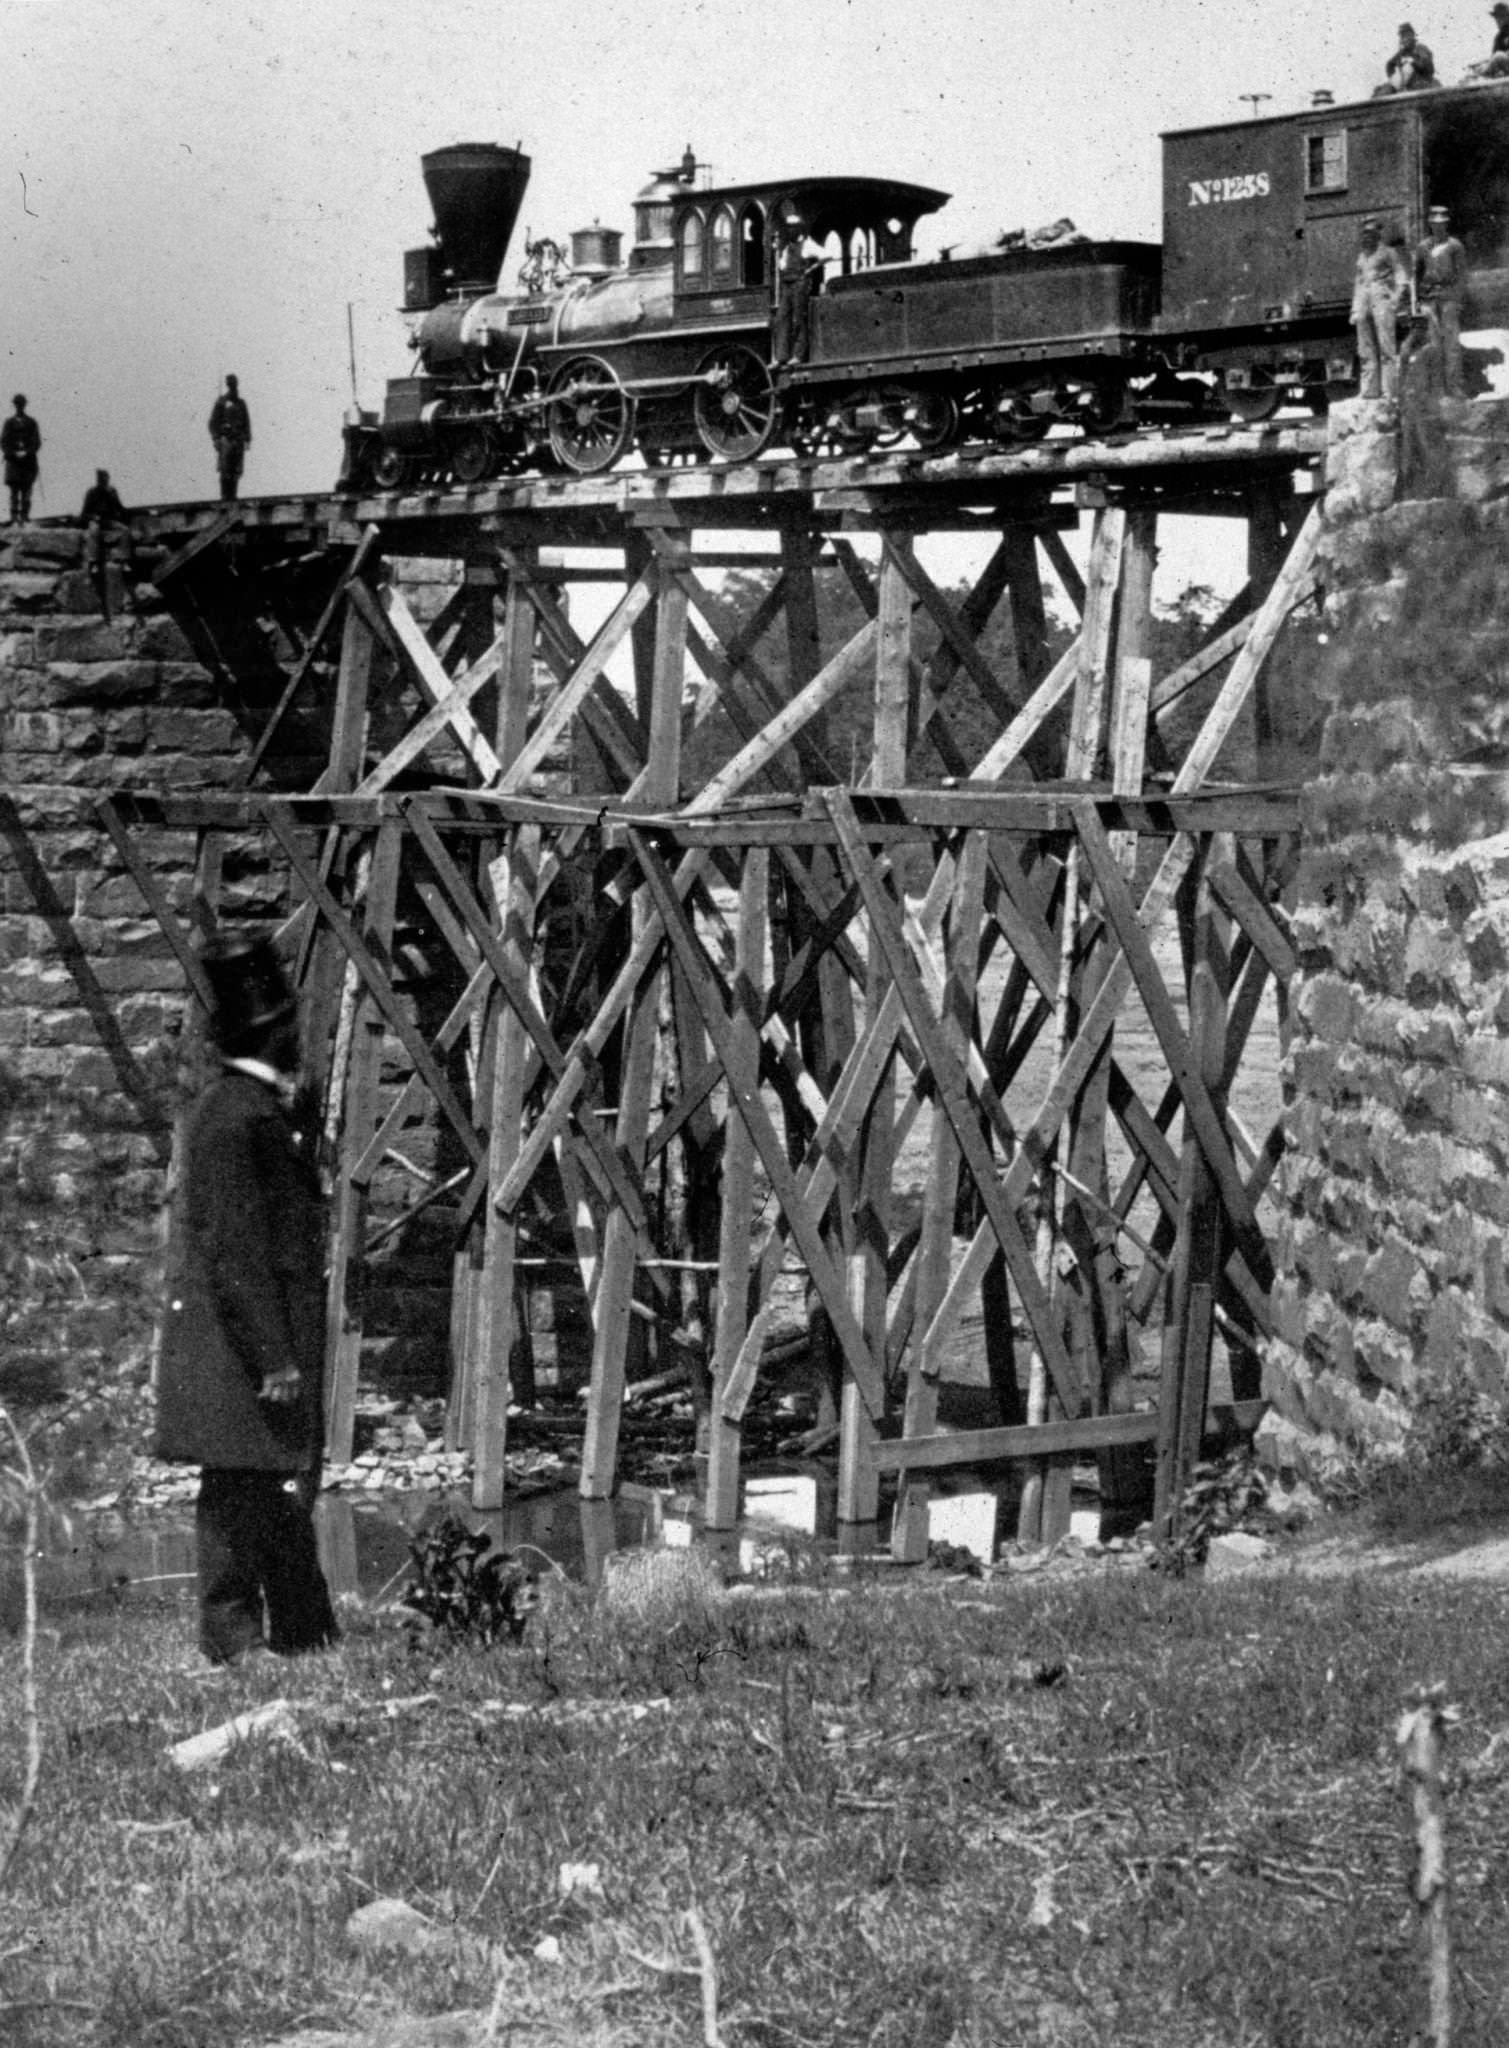 The 'Firefly' railroad engine crossing a river on a trestle, a narrow field bridge of the Orange and Alexandria US Military Railroad, 1863